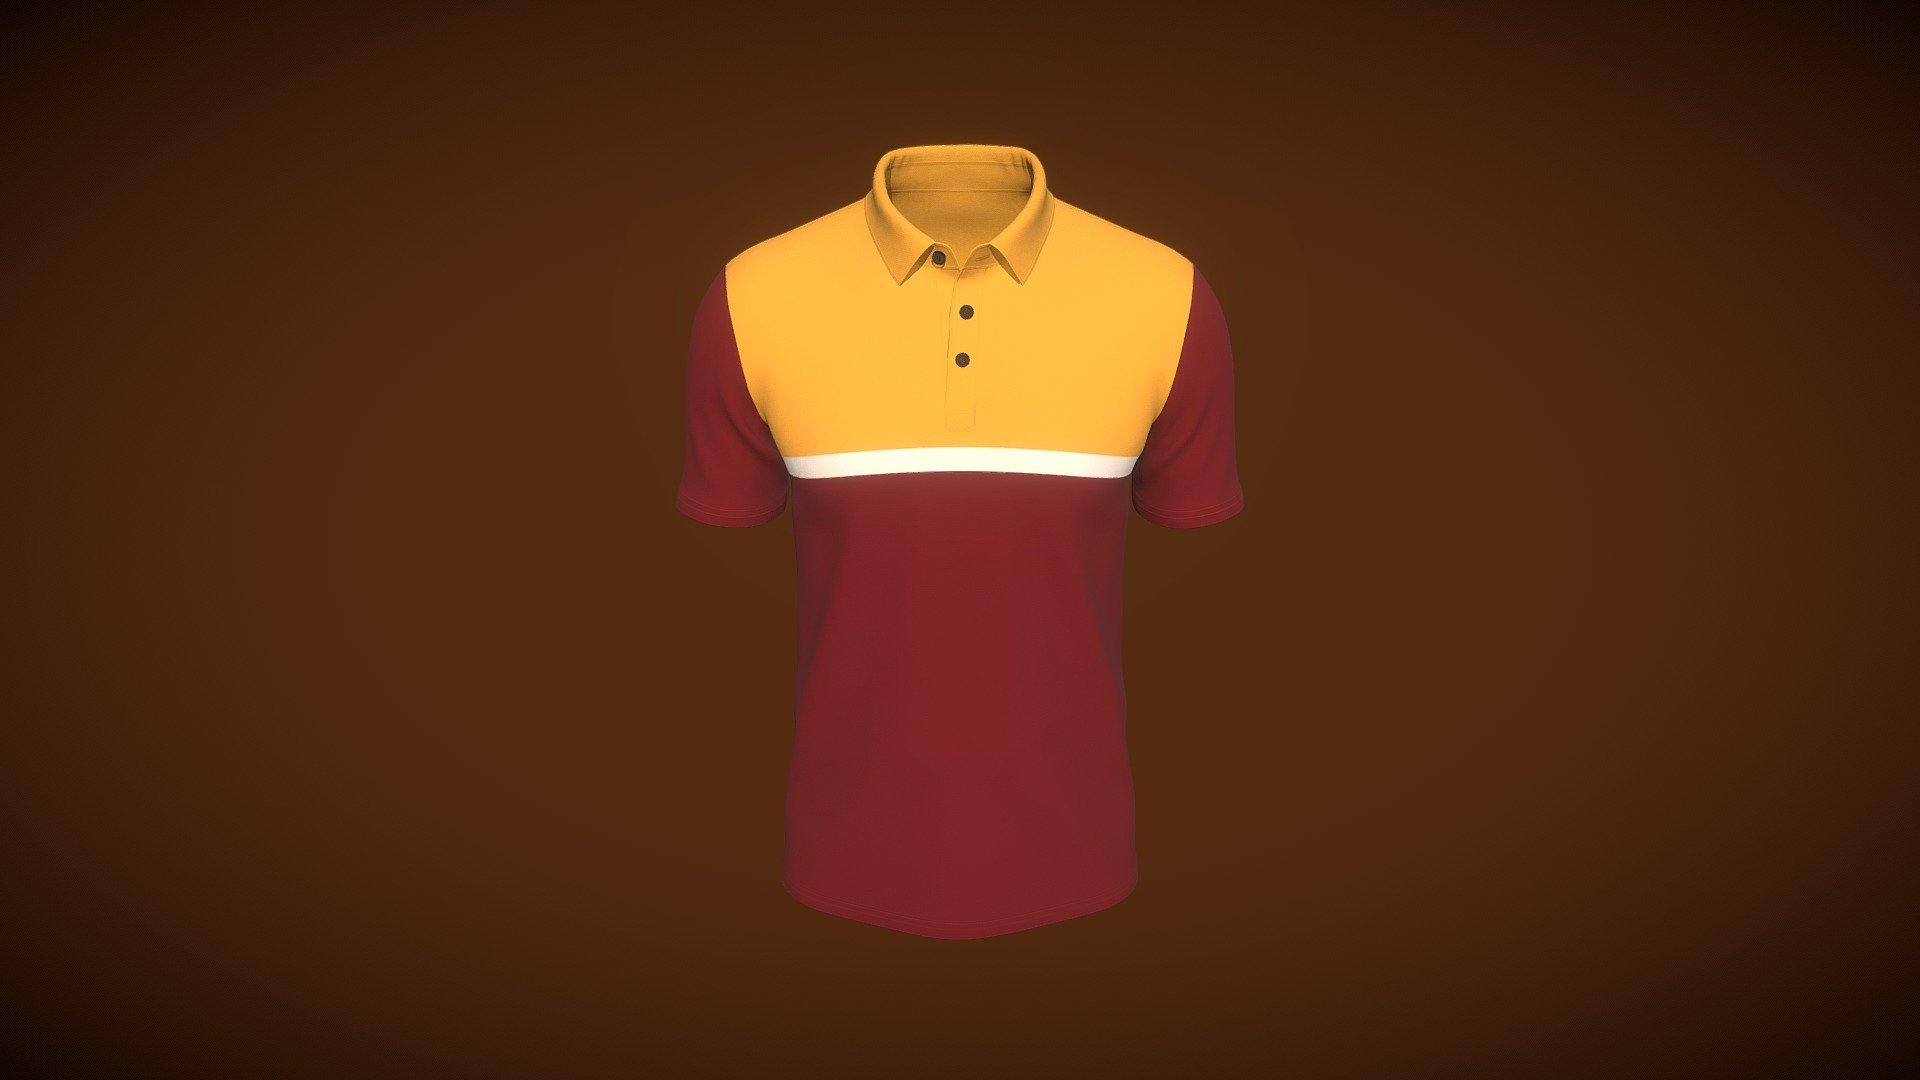 Cloth Title = Men's Regular Fit Quick Dry Polo 

SKU = DG100045 

Category = Men 

Product Type = Polo 

Cloth Length = Regular 

Body Fit = Regular Fit 

Occasion = Casual  

Sleeve Style = Set In Sleeve 


Our Services:

3D Apparel Design.

OBJ,FBX,GLTF Making with High/Low Poly.

Fabric Digitalization.

Mockup making.

3D Teck Pack.

Pattern Making.

2D Illustration.

Cloth Animation and 360 Spin Video.


We designed all the types of cloth specially focused on product visualization, e-commerce, fitting, and production. 

We will design: 

T-shirts 

Polo shirts 

Hoodies 

Sweatshirt 

Jackets 

Shirts 

TankTops 

Trousers 

Bras 

Underwear 

Blazer 

Aprons 

Leggings 

and All Fashion items. 





Our goal is to make sure what we provide you, meets your demand 3d model